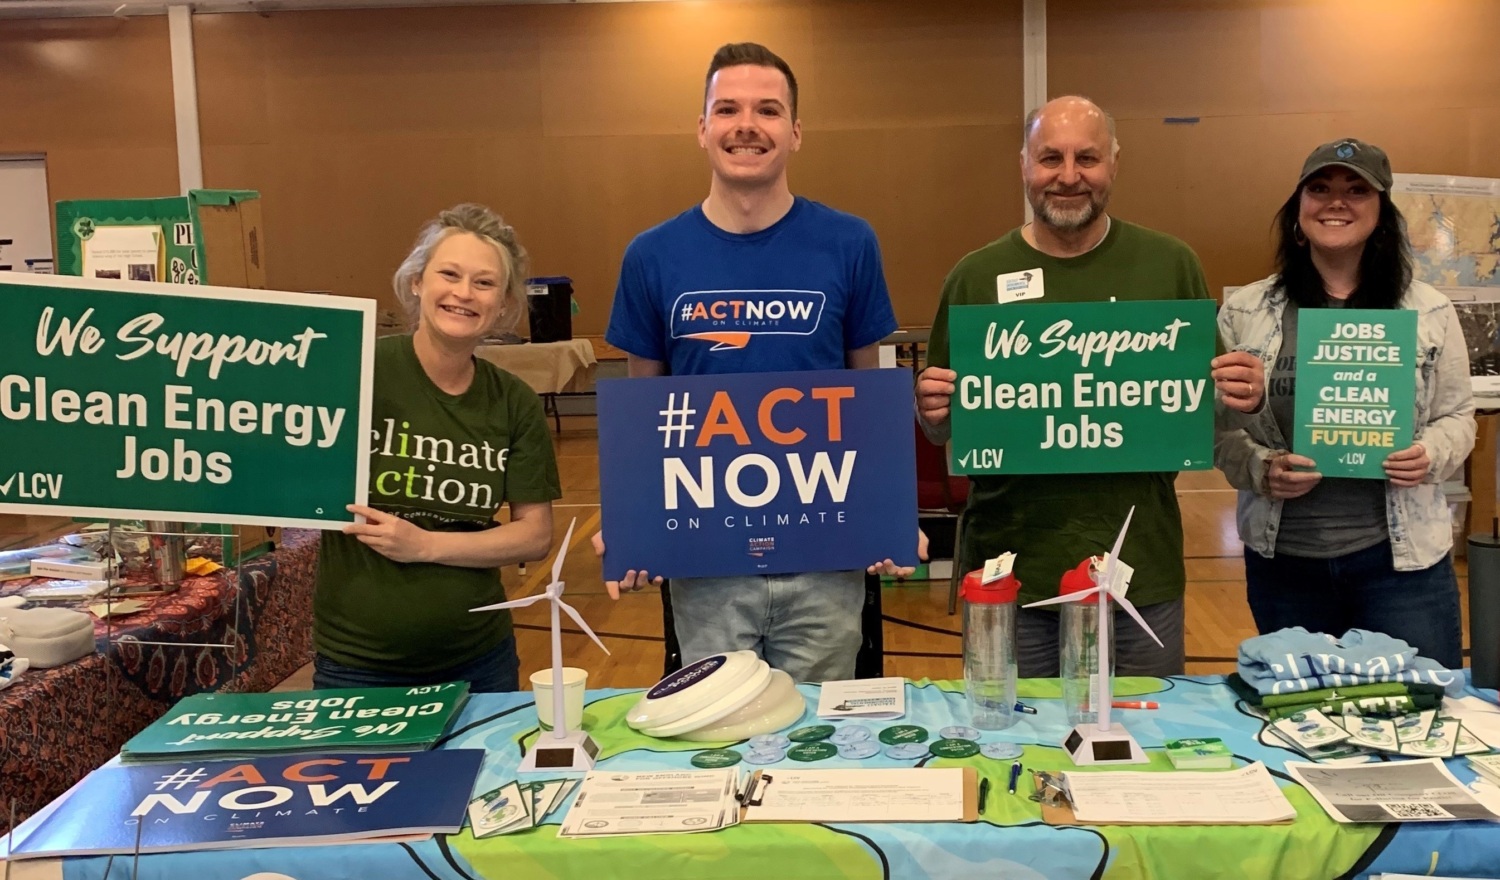 Climate Action volunteers posing at a booth with signs reading "We Support Clean Energy Jobs"